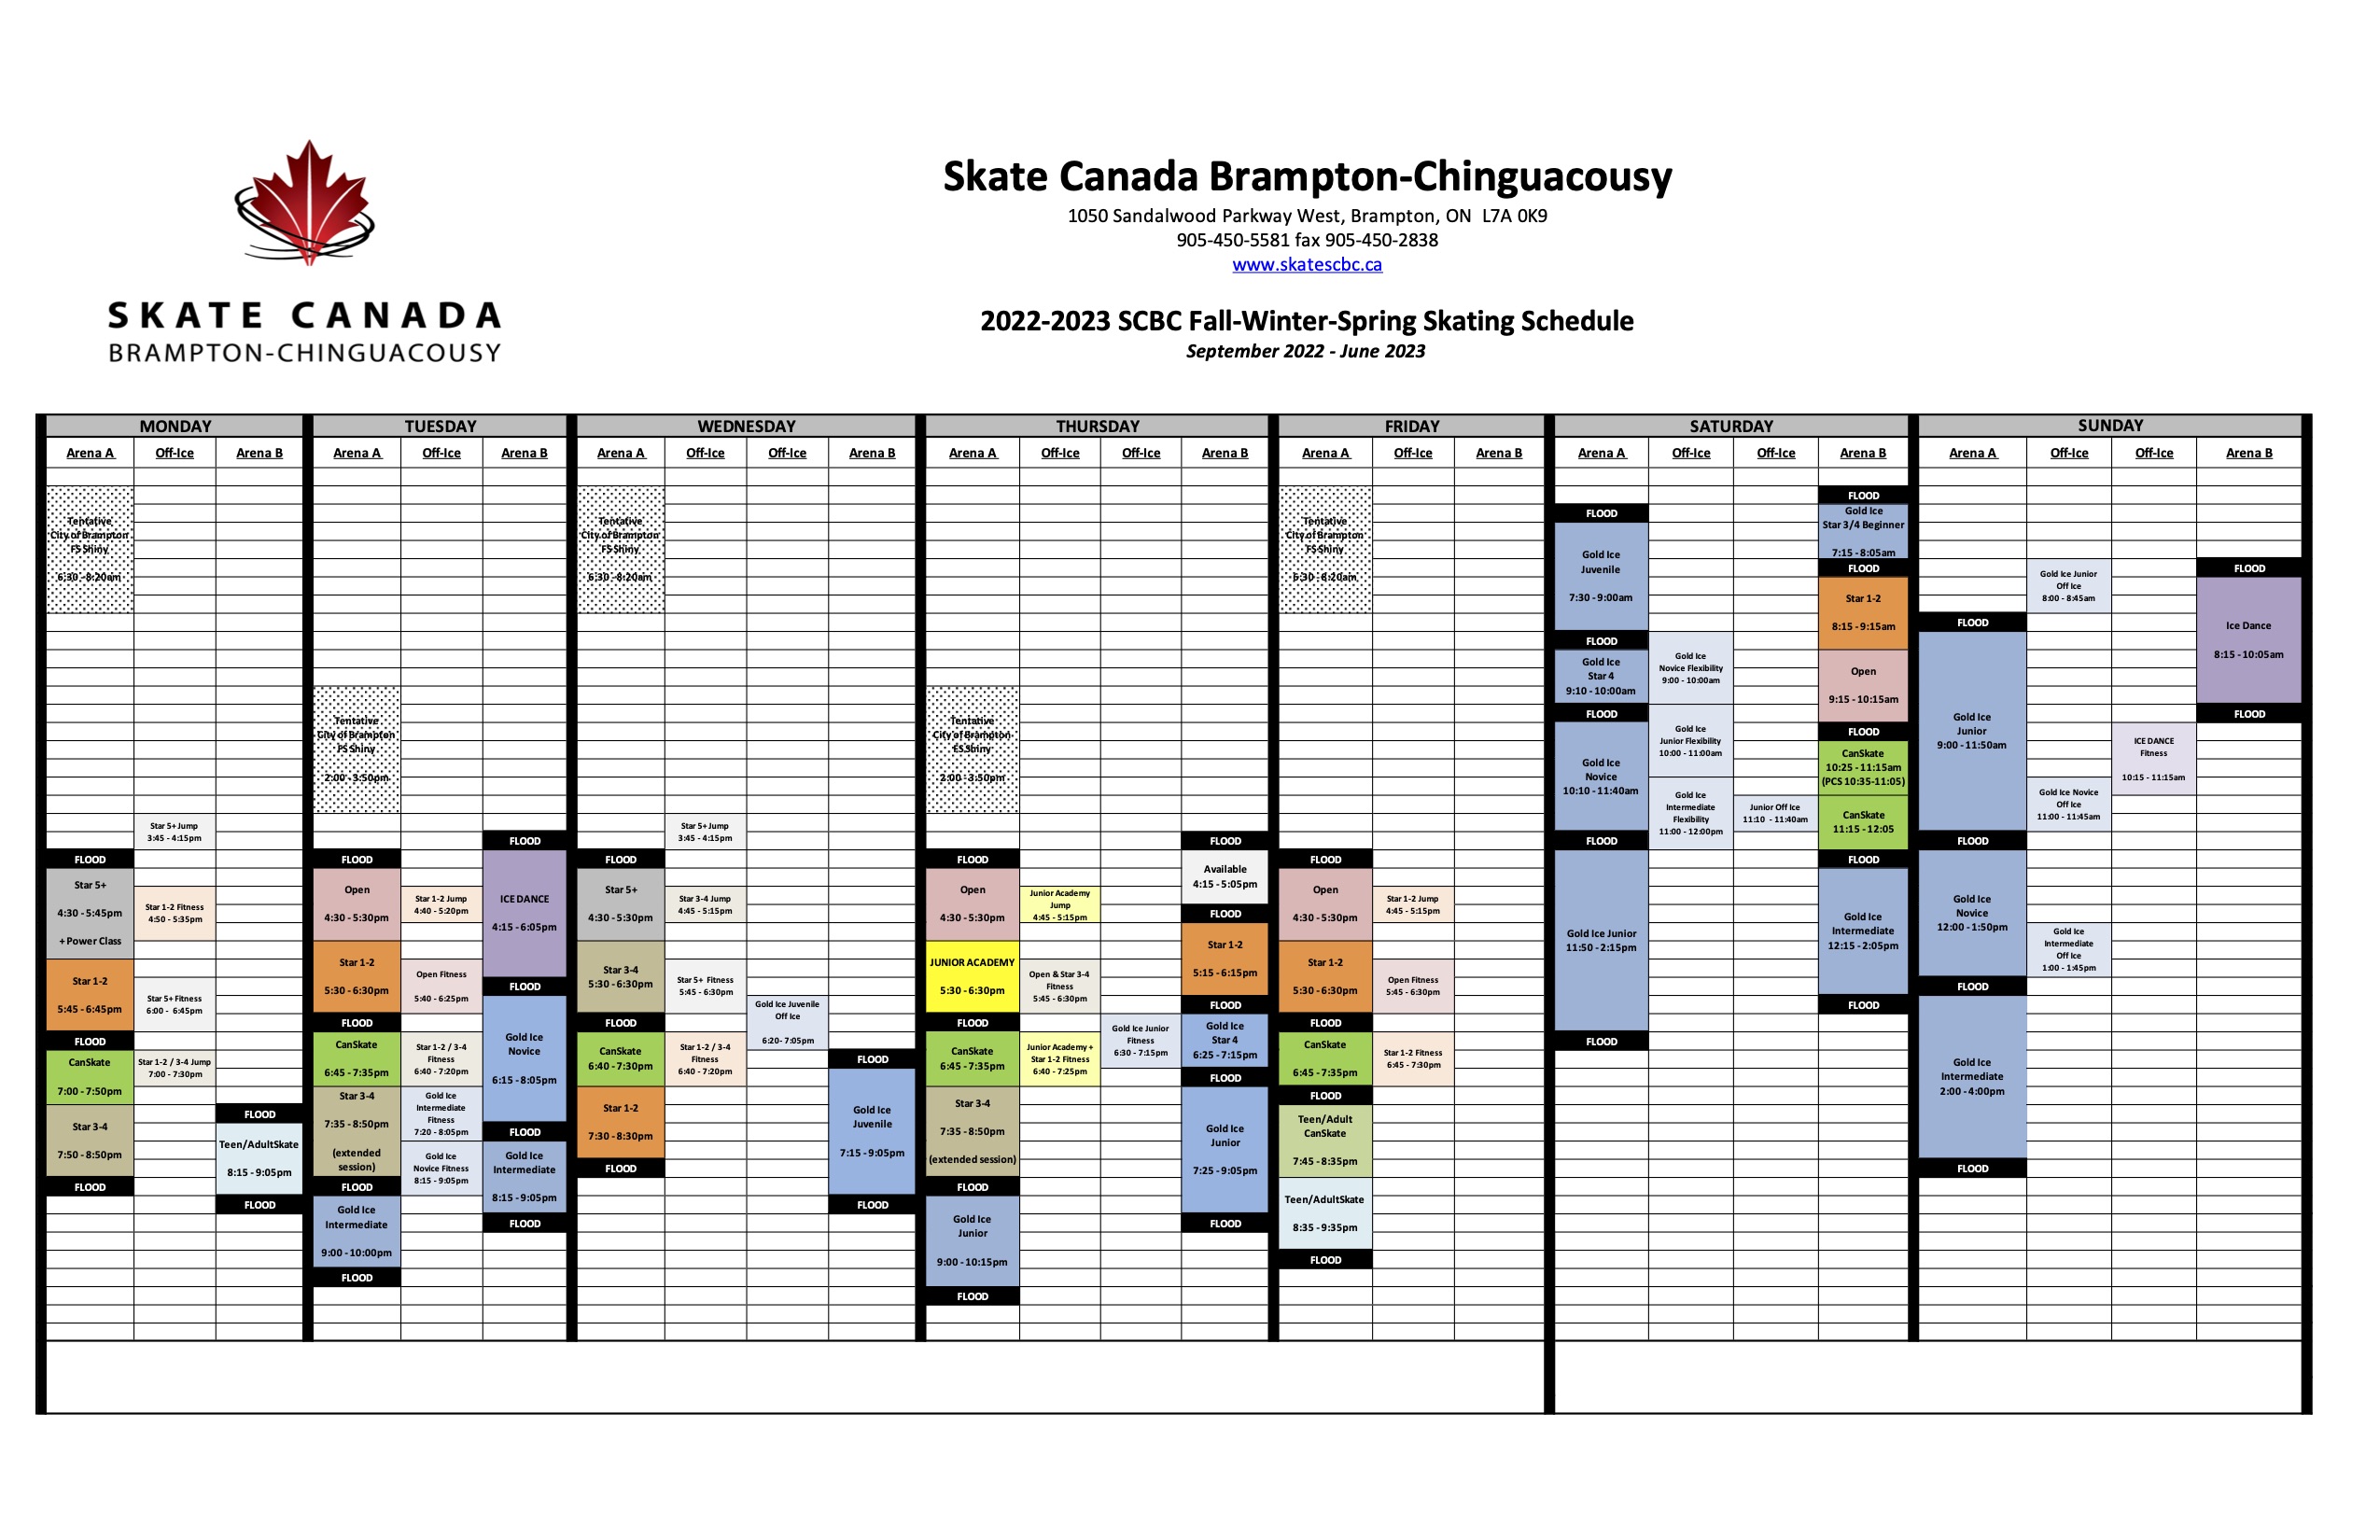 2022-2023 SCBC Fall/Winter/Spring Sessions - Skate Canada Brampton-Chinguacousy